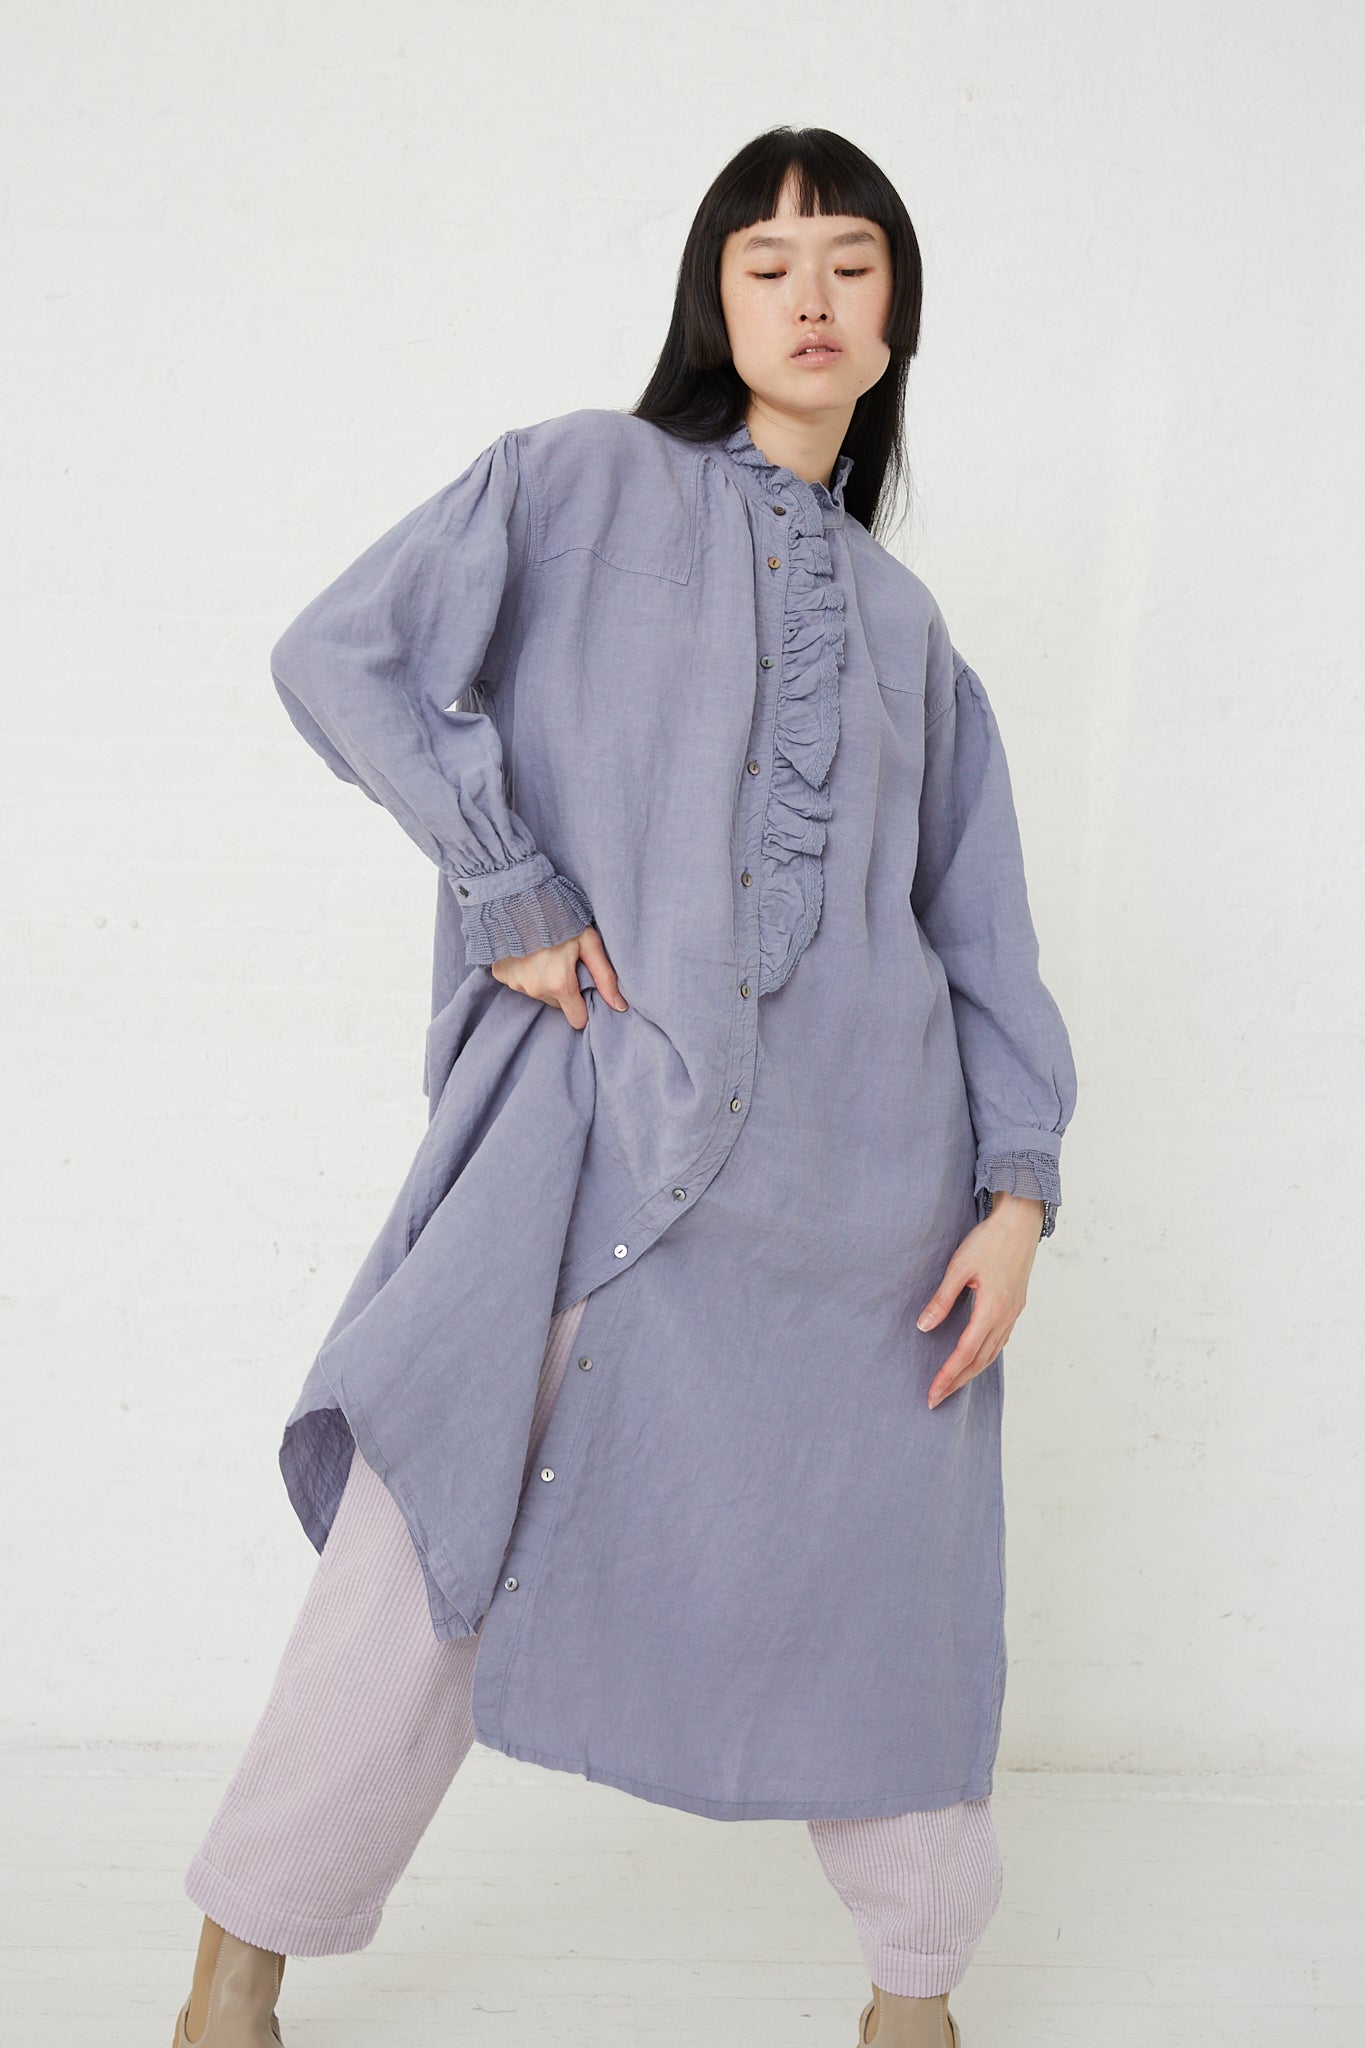 The model is wearing a nest Robe Linen Cotton Lace Omi-Zarashi Dress in Lavender, featuring a front button closure and dyed linen fabric.